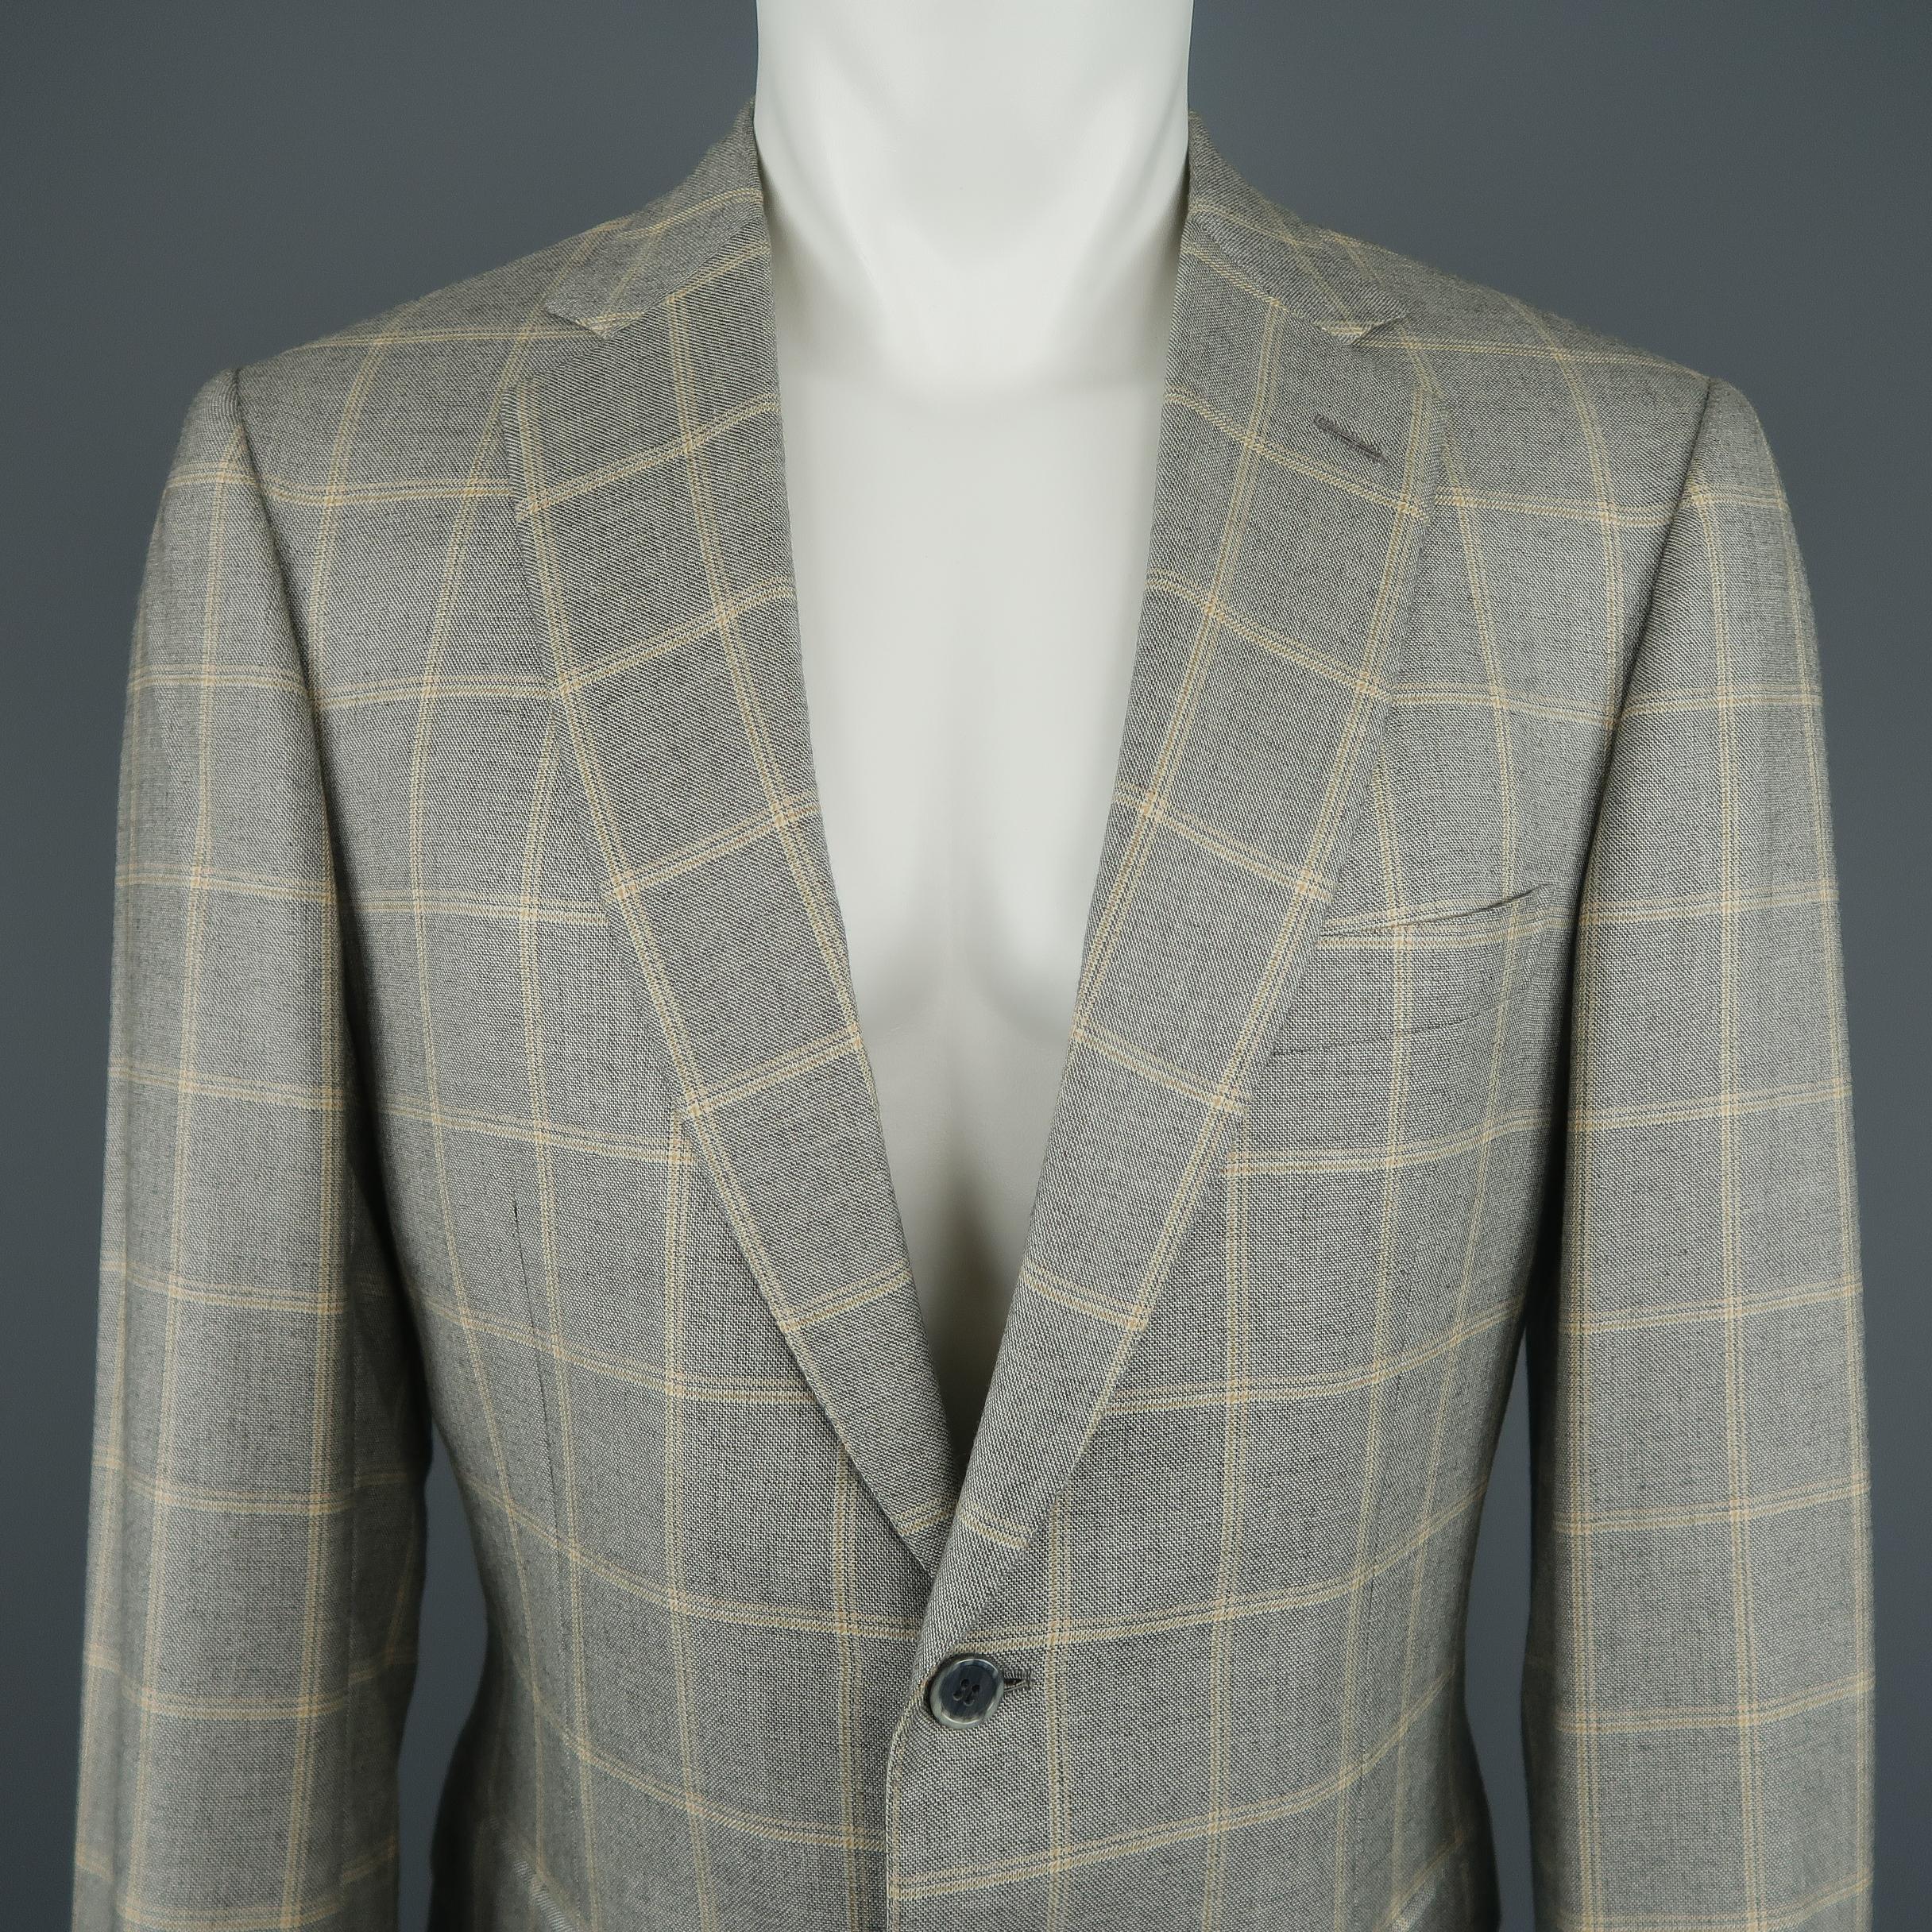 BRIONI sport coat comes in silk wool blend light gray and gold windowpane fabric with a single breasted two button closure, notch lapel, and functional button cuffs. Made in Italy.
 
Excellent Pre-Owned Condition.
Marked: 40R
 
Measurements:
